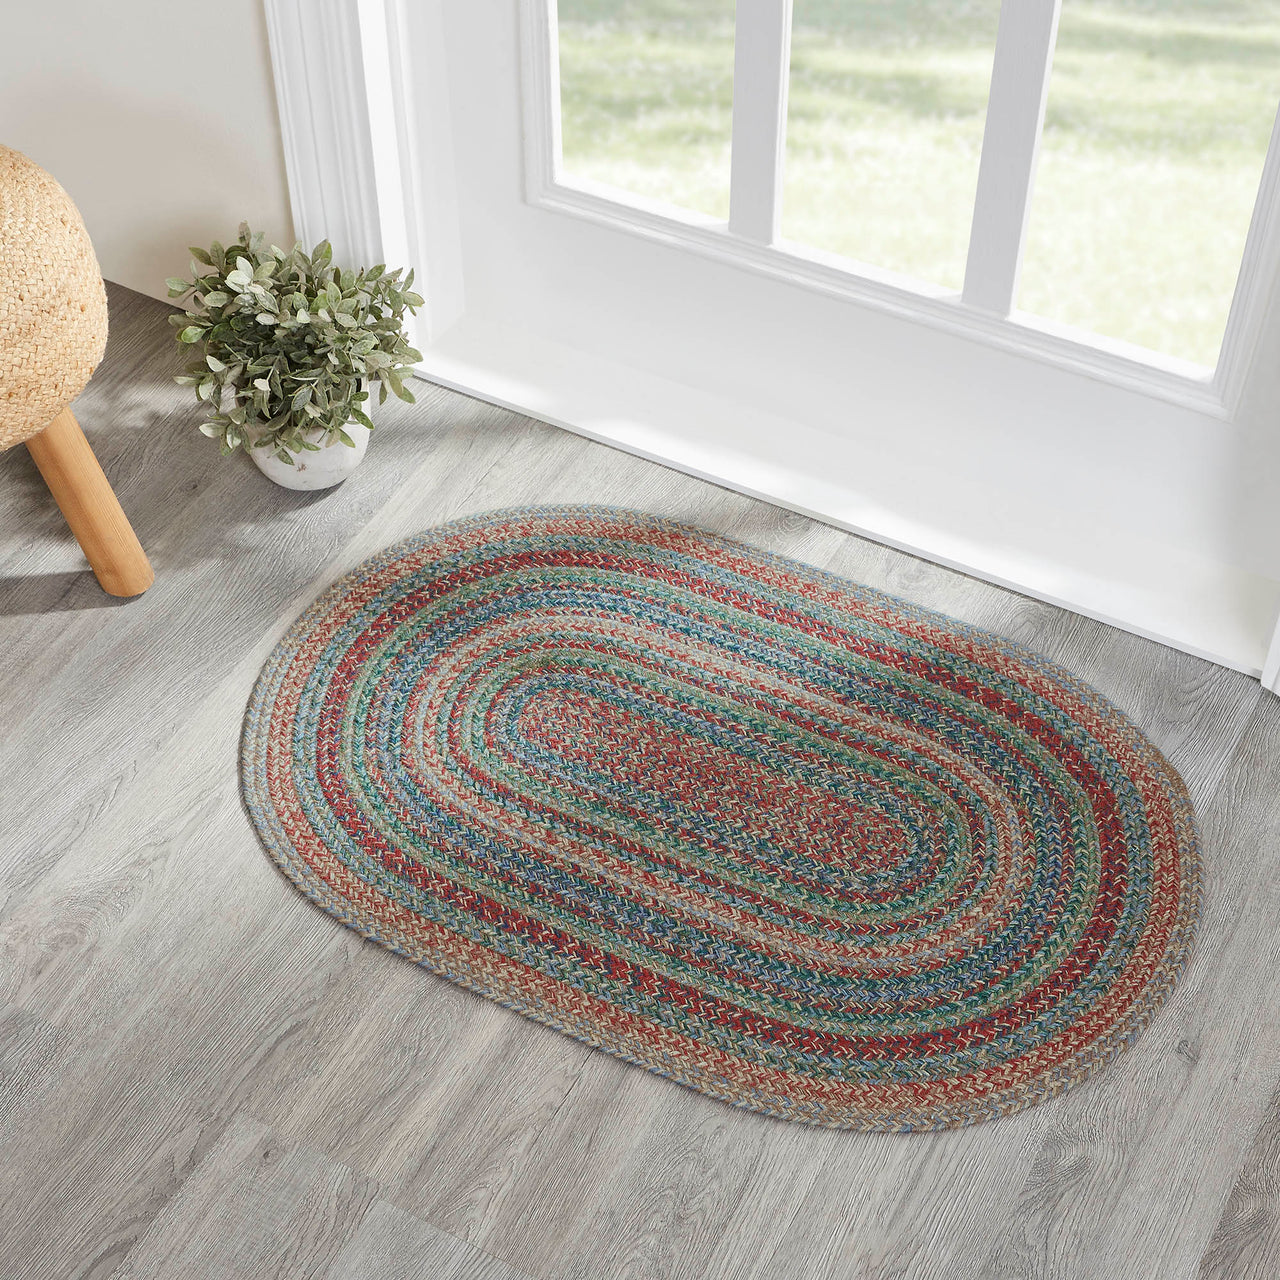 Multi Braided Jute Oval Braided Rugs with Rug Pad - VHC Brands